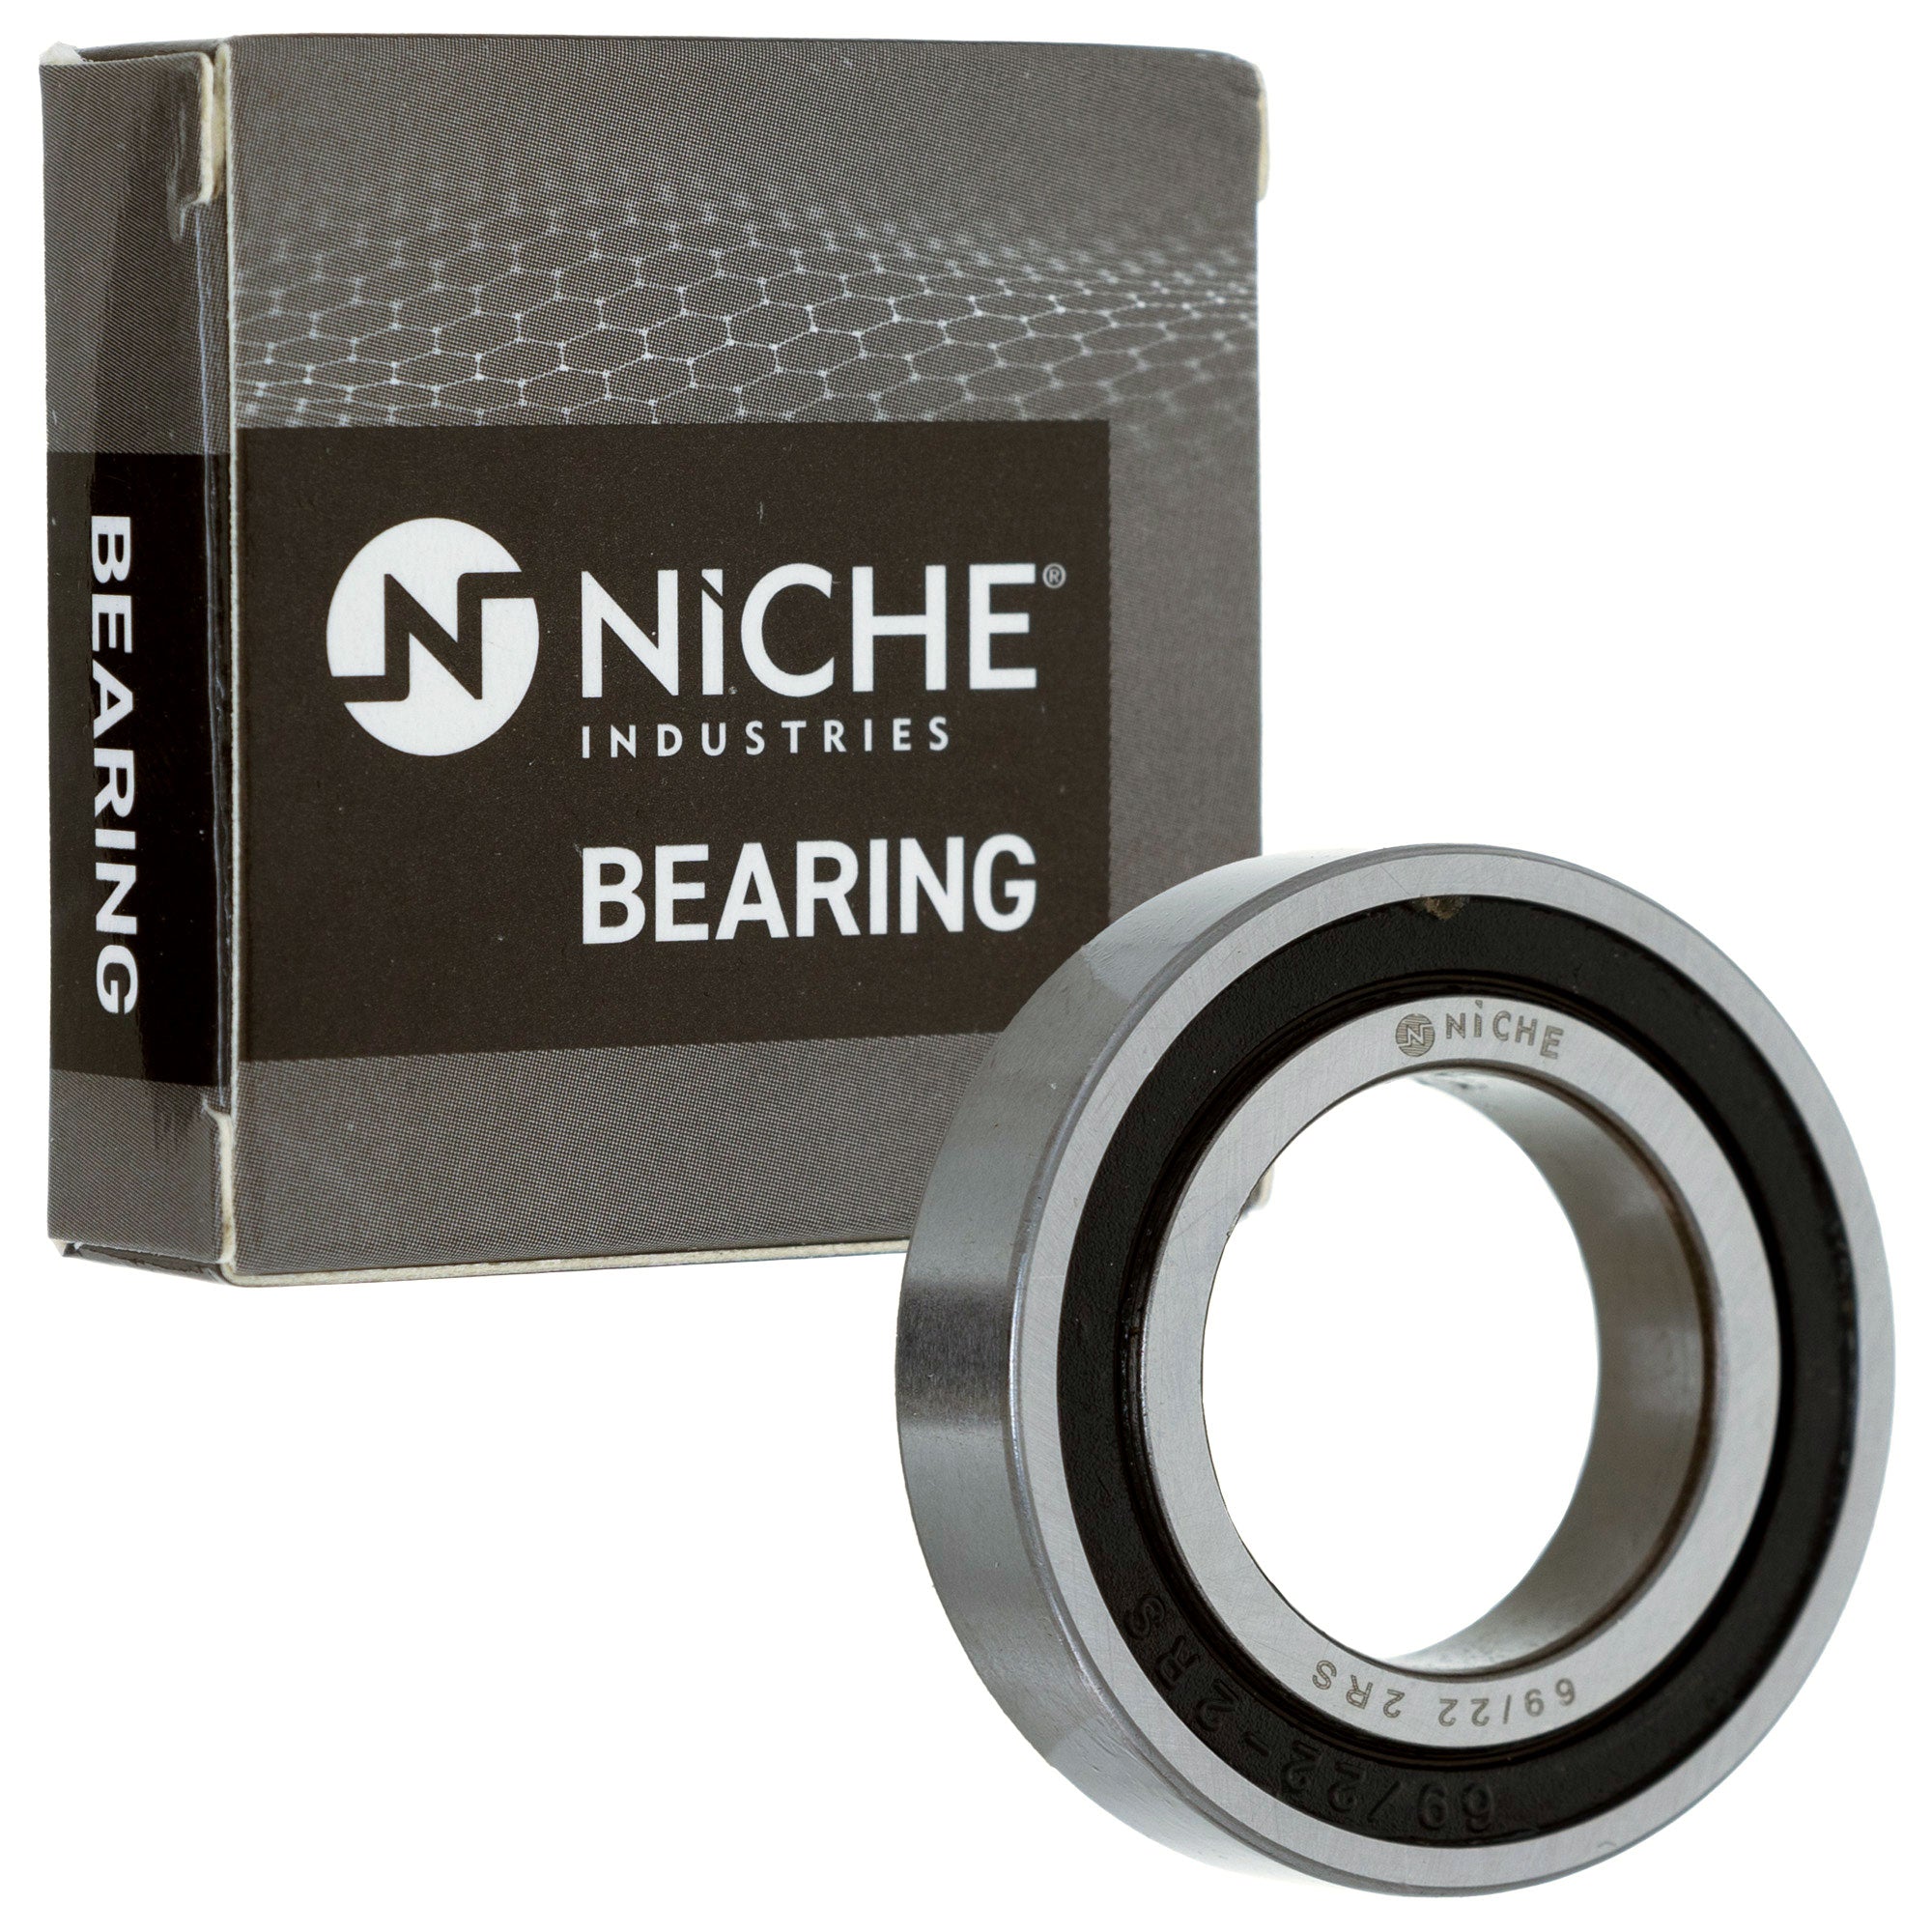 NICHE 519-CBB2201R Bearing 2-Pack for zOTHER YZ450FX YZ450F YZ250FX